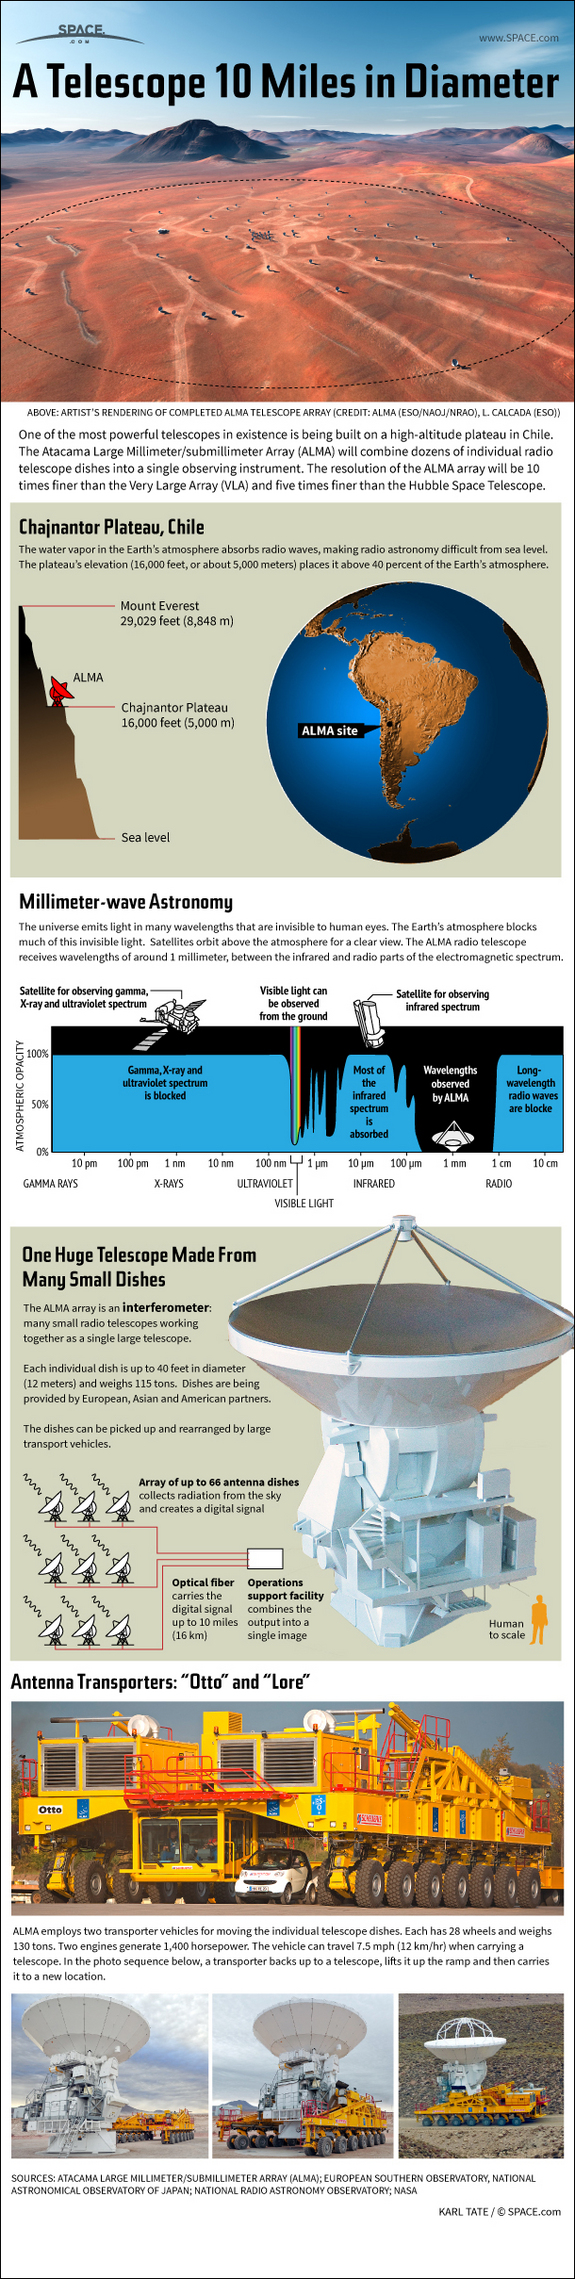 Find out how the huge ALMA radio telescope in Chile works, in this SPACE.com Infographic.